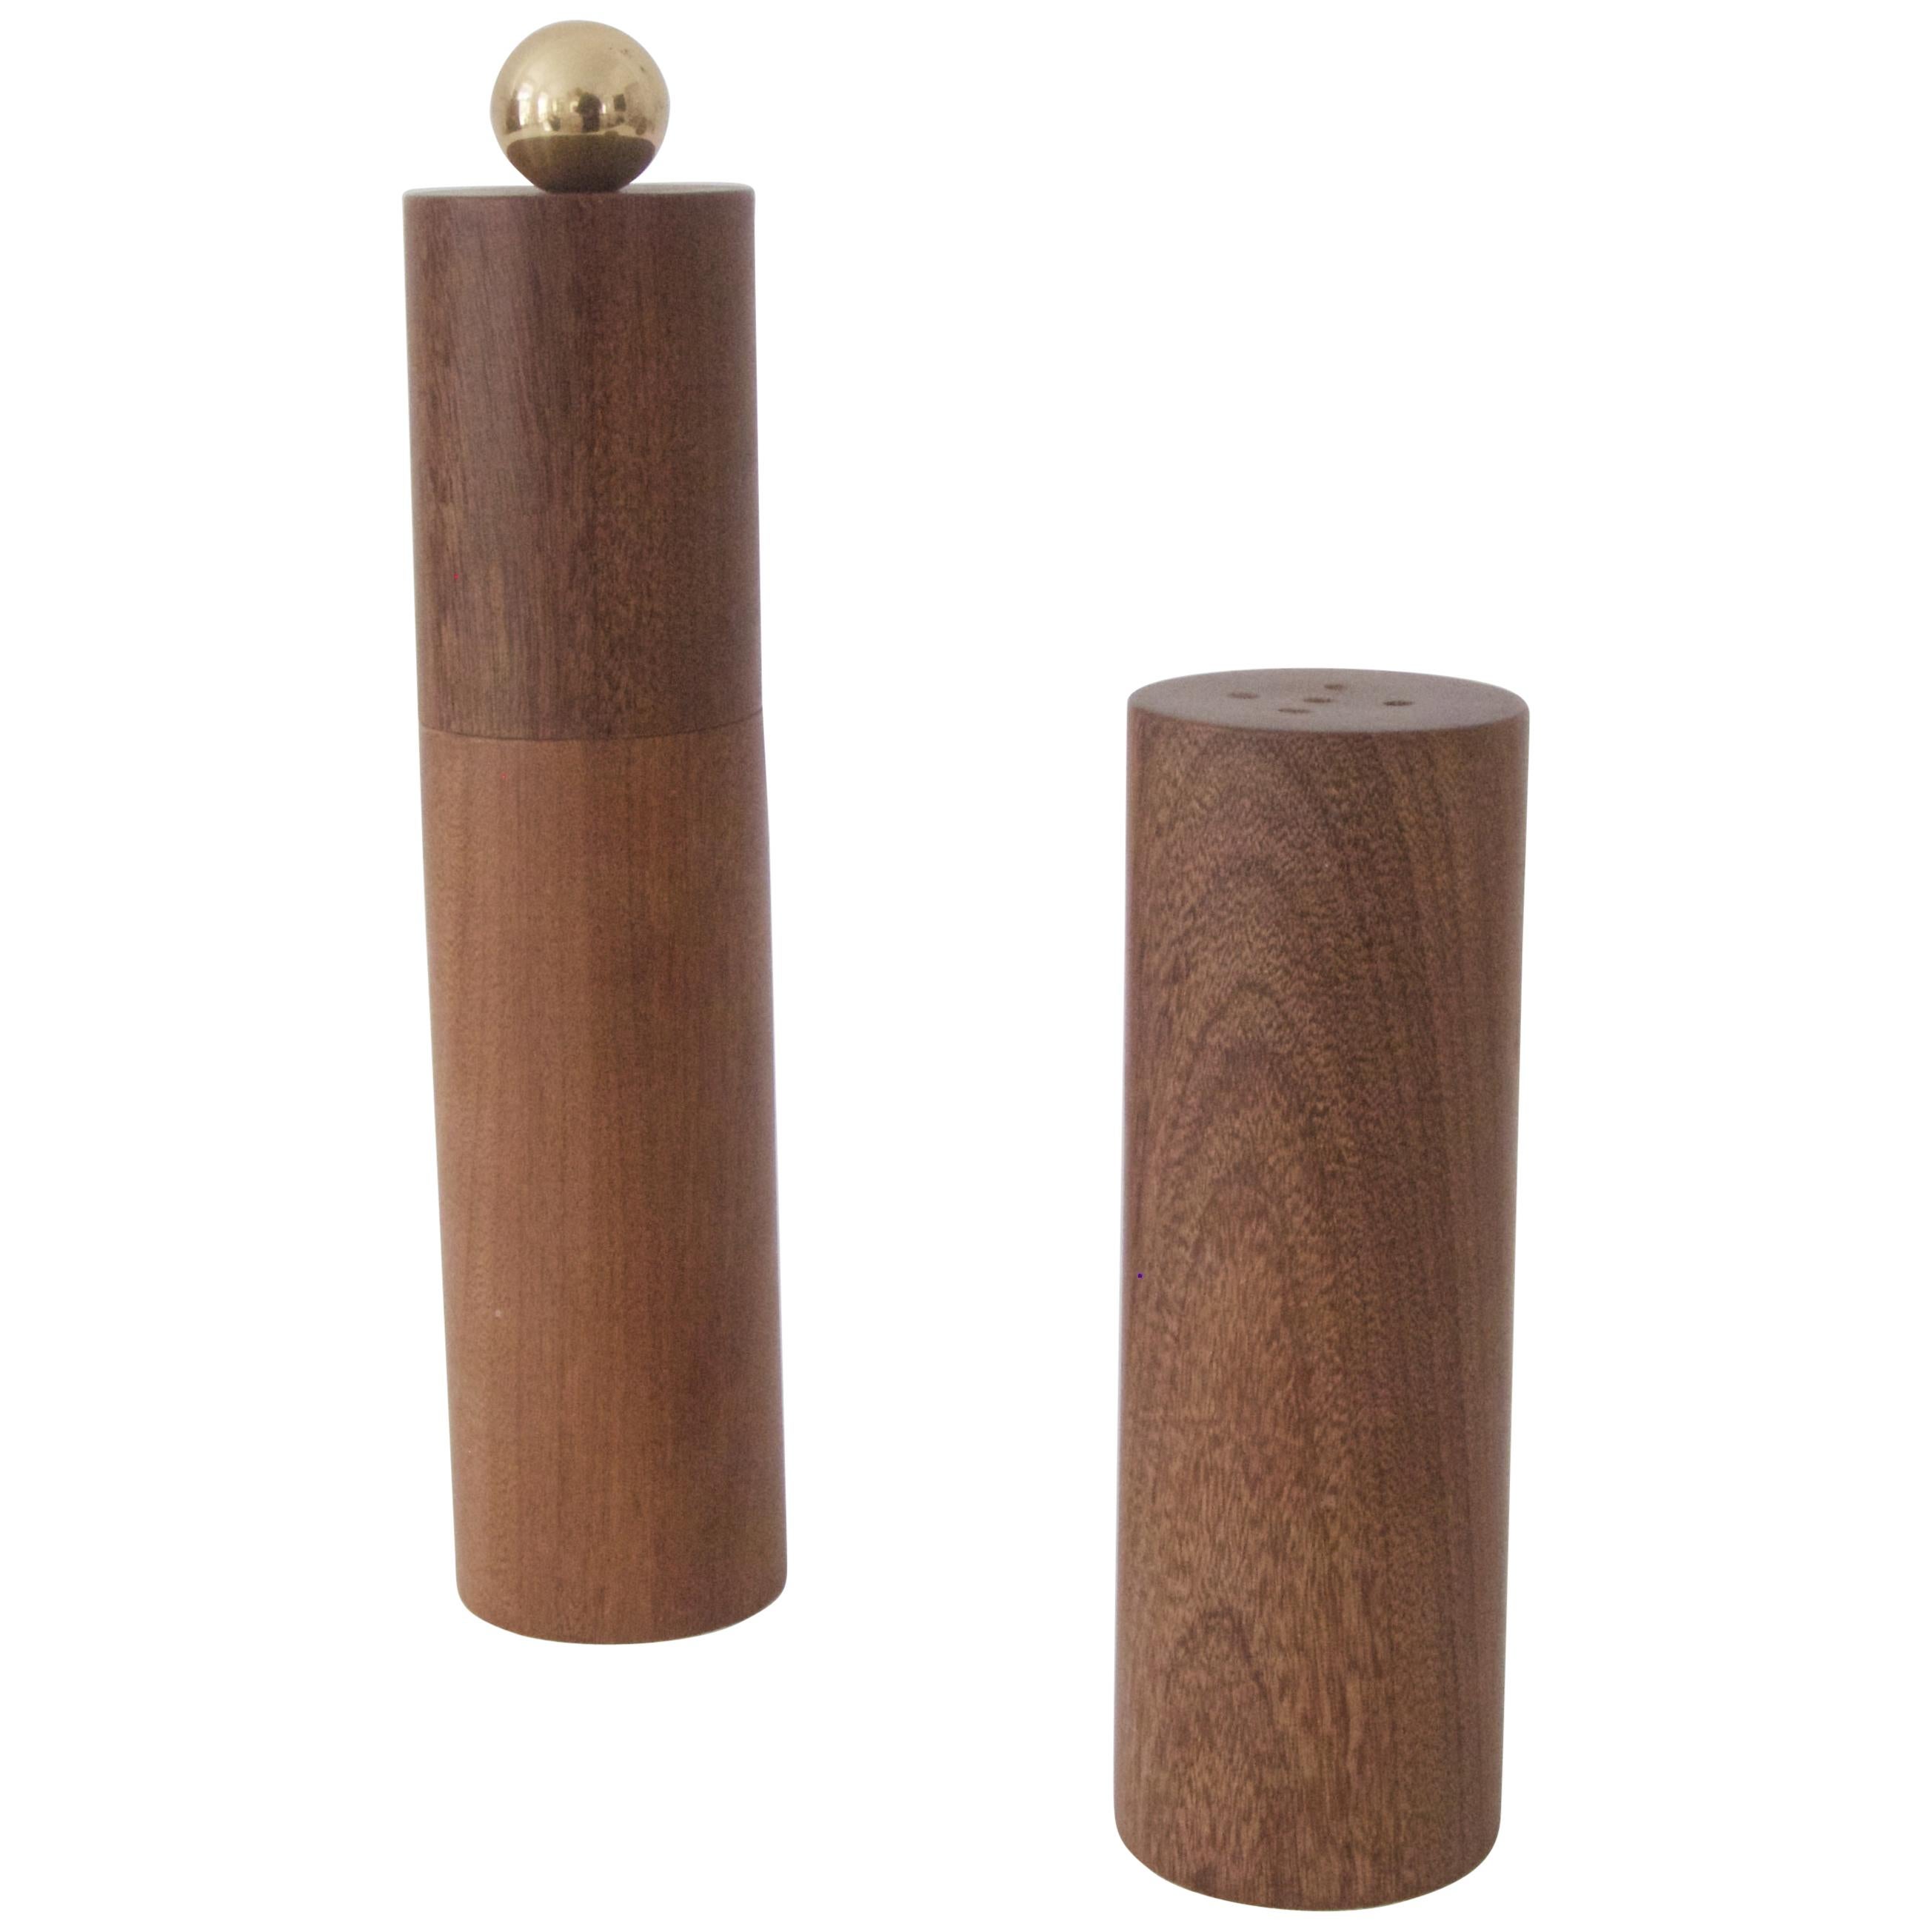 Salt Shaker and Pepper Mill by Carl Auböck For Sale